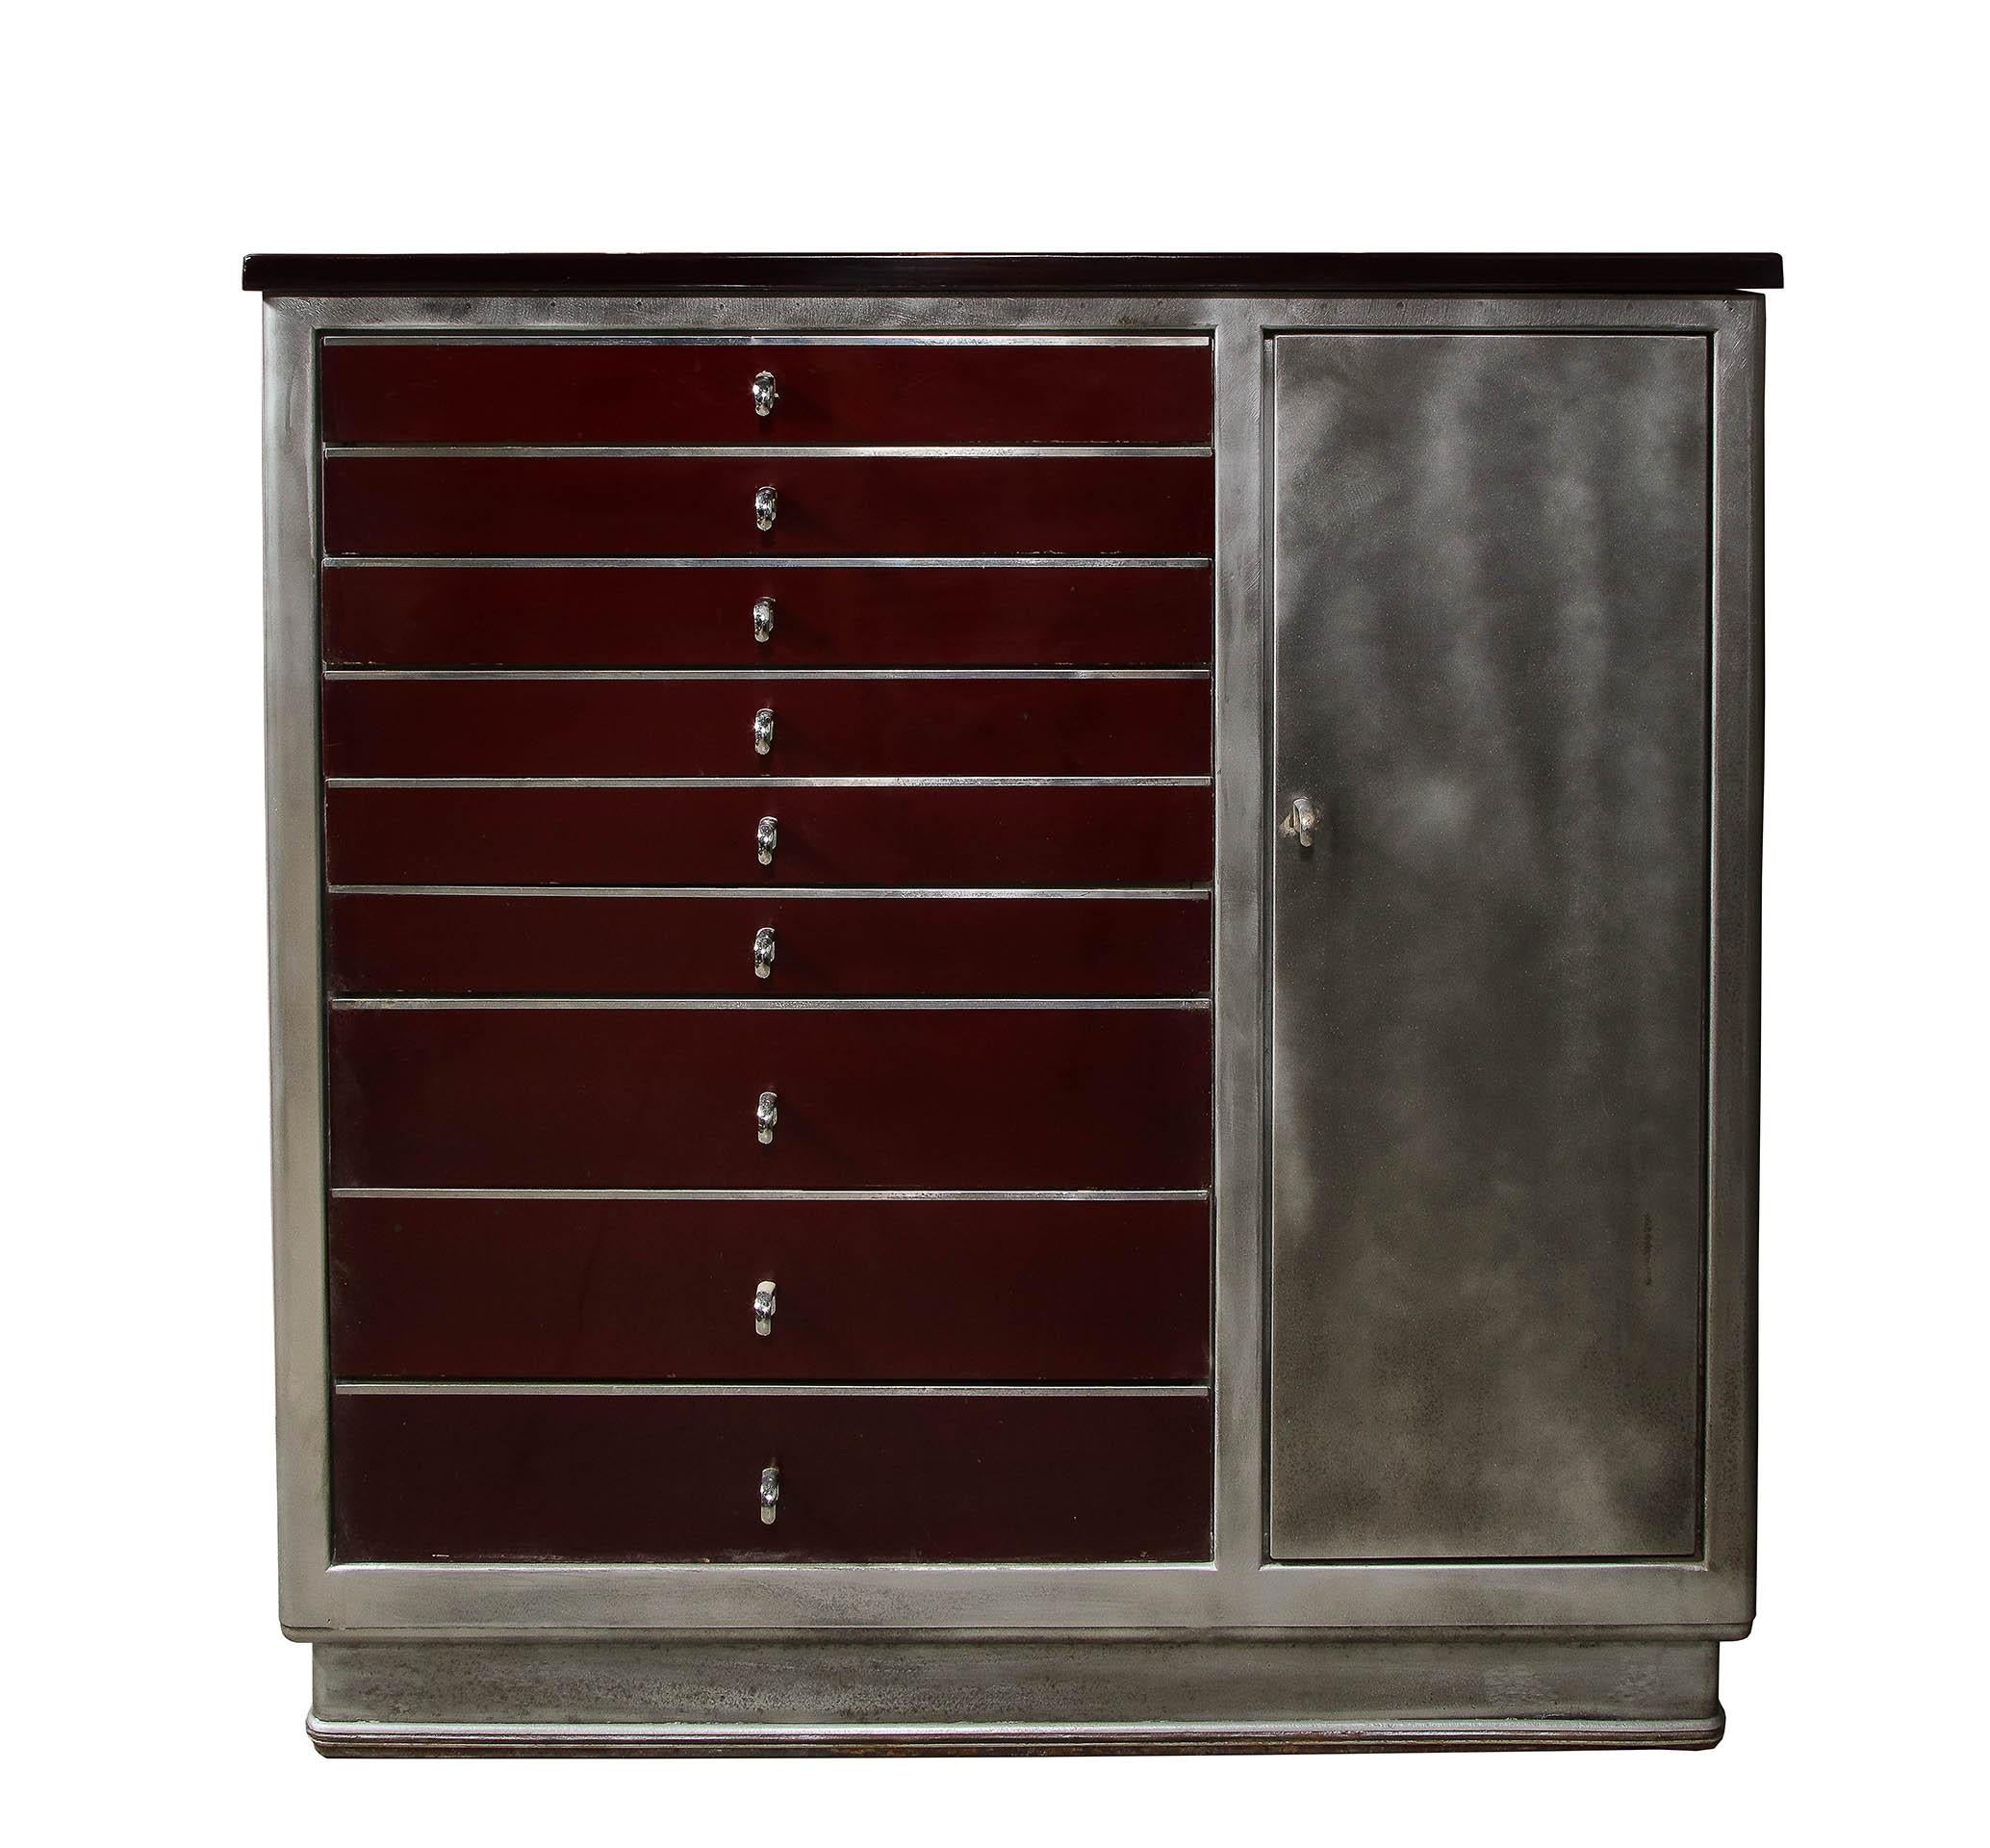 The brushed steel Cabinet with an enamel top over a 9 enameled drawers and 1 brushed steel door on the front side and an all brushed steel back with 3 doors and a fall front drawer. All with chrome pulls.